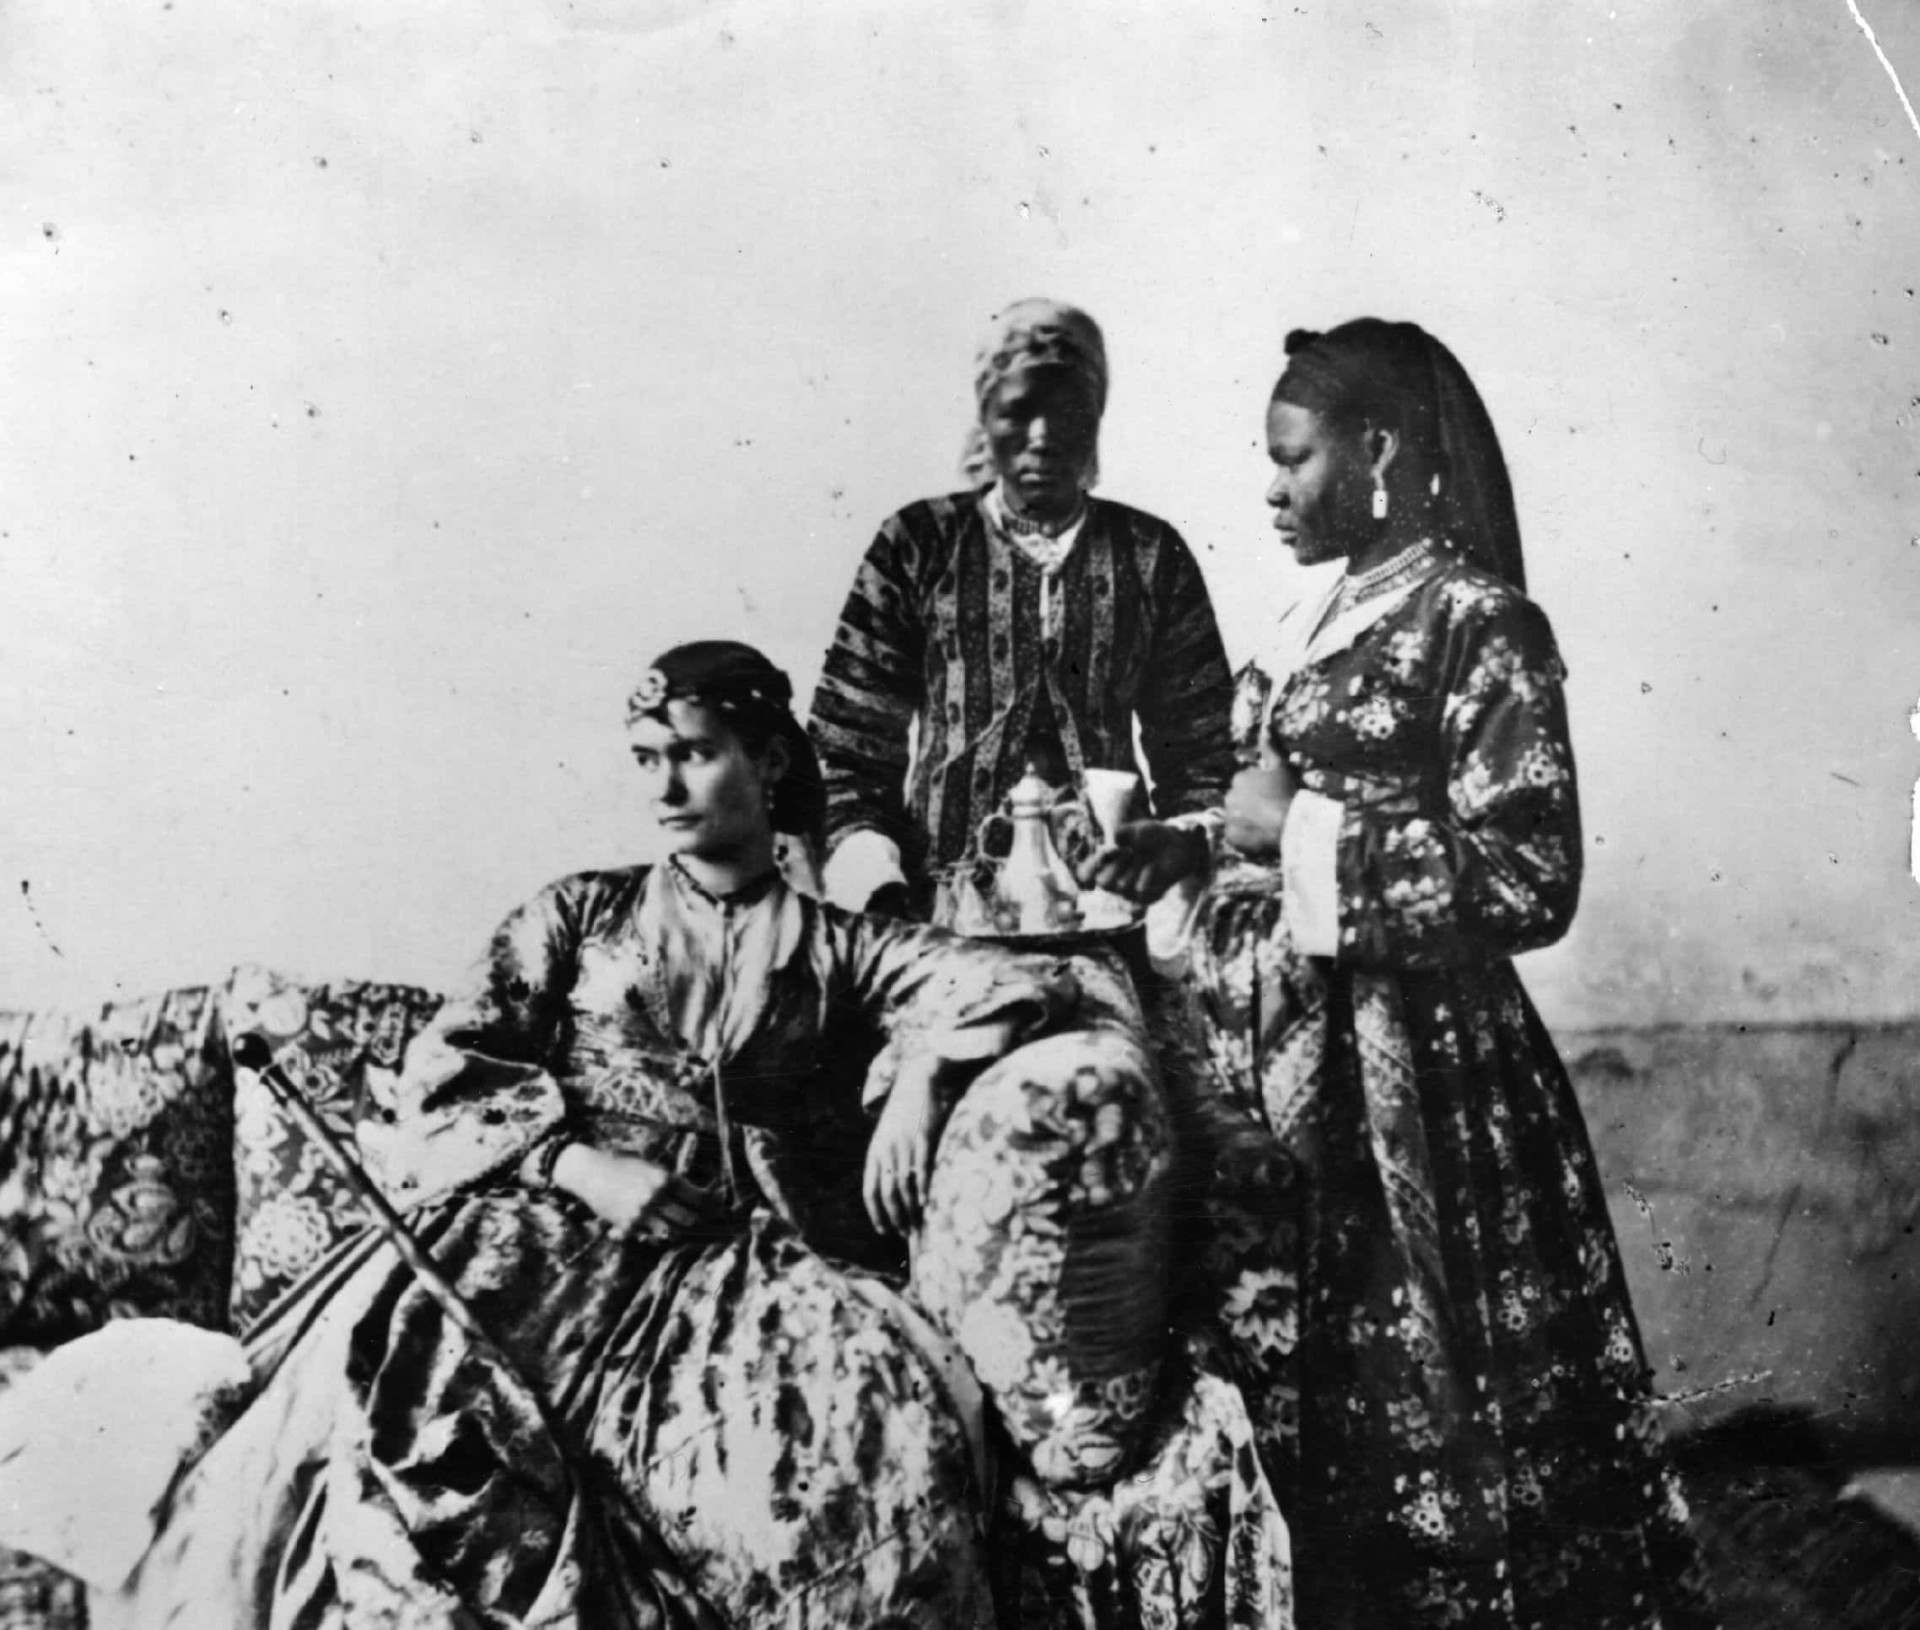 Circa 1870, the woman on the left wears a crinoline underneath her dress while being attended to by the other two women, this in a Cairo harem.<p>You may also like:<a href="https://www.starsinsider.com/n/398730?utm_source=msn.com&utm_medium=display&utm_campaign=referral_description&utm_content=397441v1en-en"> Friday the 13th: Inside the world's most haunted forest</a></p>